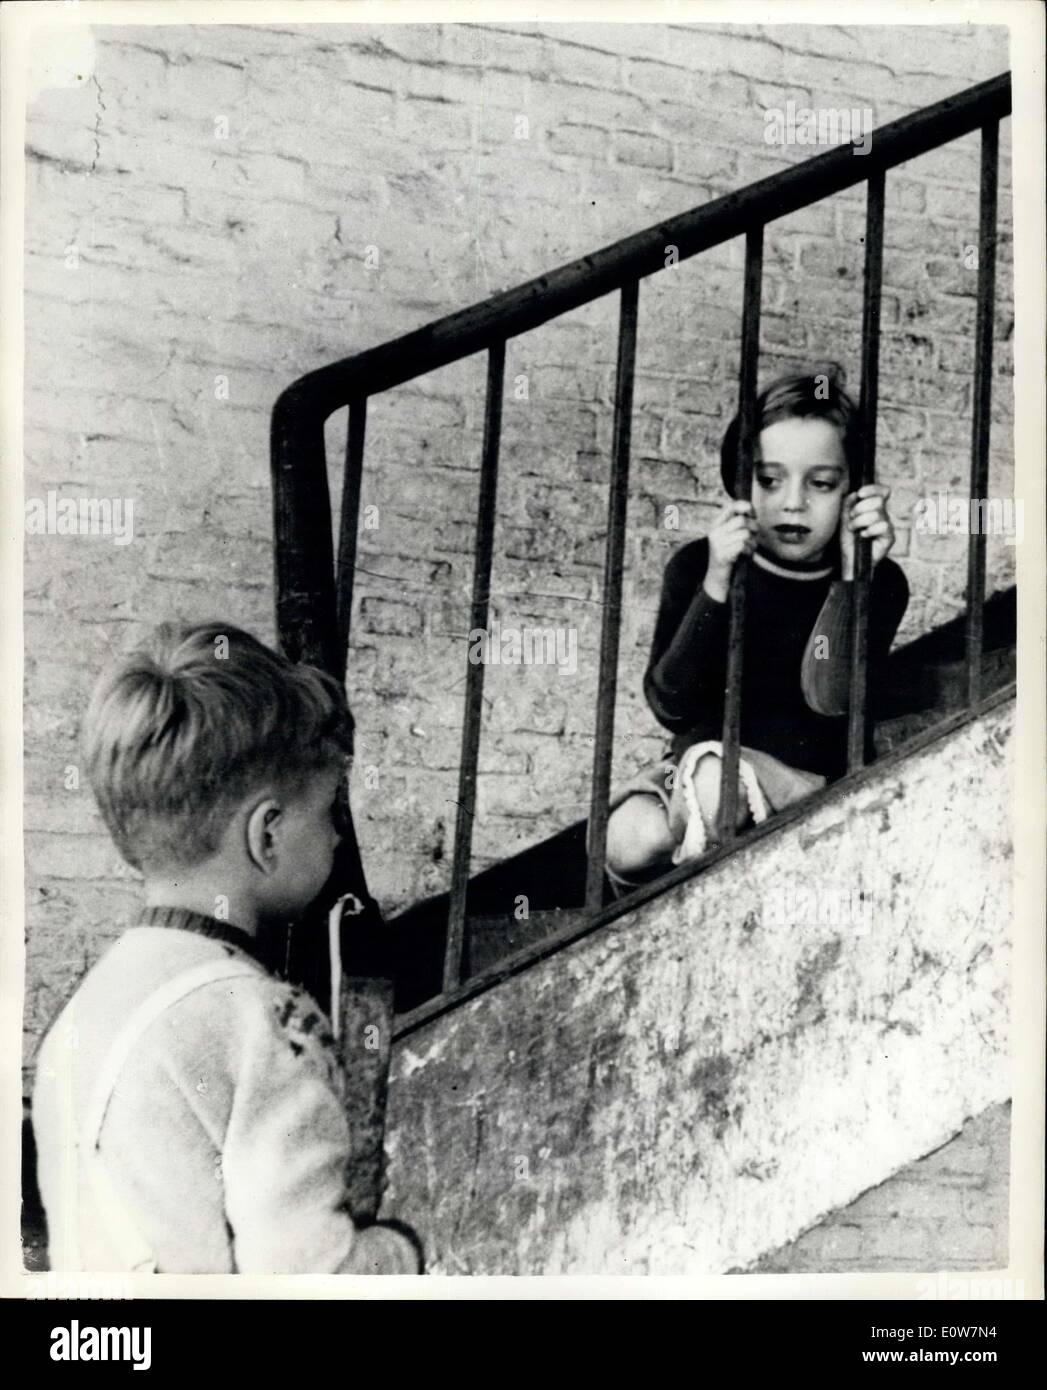 Oct. 27, 1961 - Their door to happiness: Twenty-four children from the bleak and their life of German refugees camps cometo English homes for a 10-week goliday in Lewham, Sevencake and Luton. The visit is organized by International Help for Children - which since 1947, has given holidays to more than 12,000 children.Photo shows Rosemarie Senf - one of the lucky ones chosen for a holiday. She spreads the good news in the obly playground she knows - a stairway to Spandau Camp, Berlin. The camp has always been her home. She lives there in one room with her mother, father and six other children Stock Photo